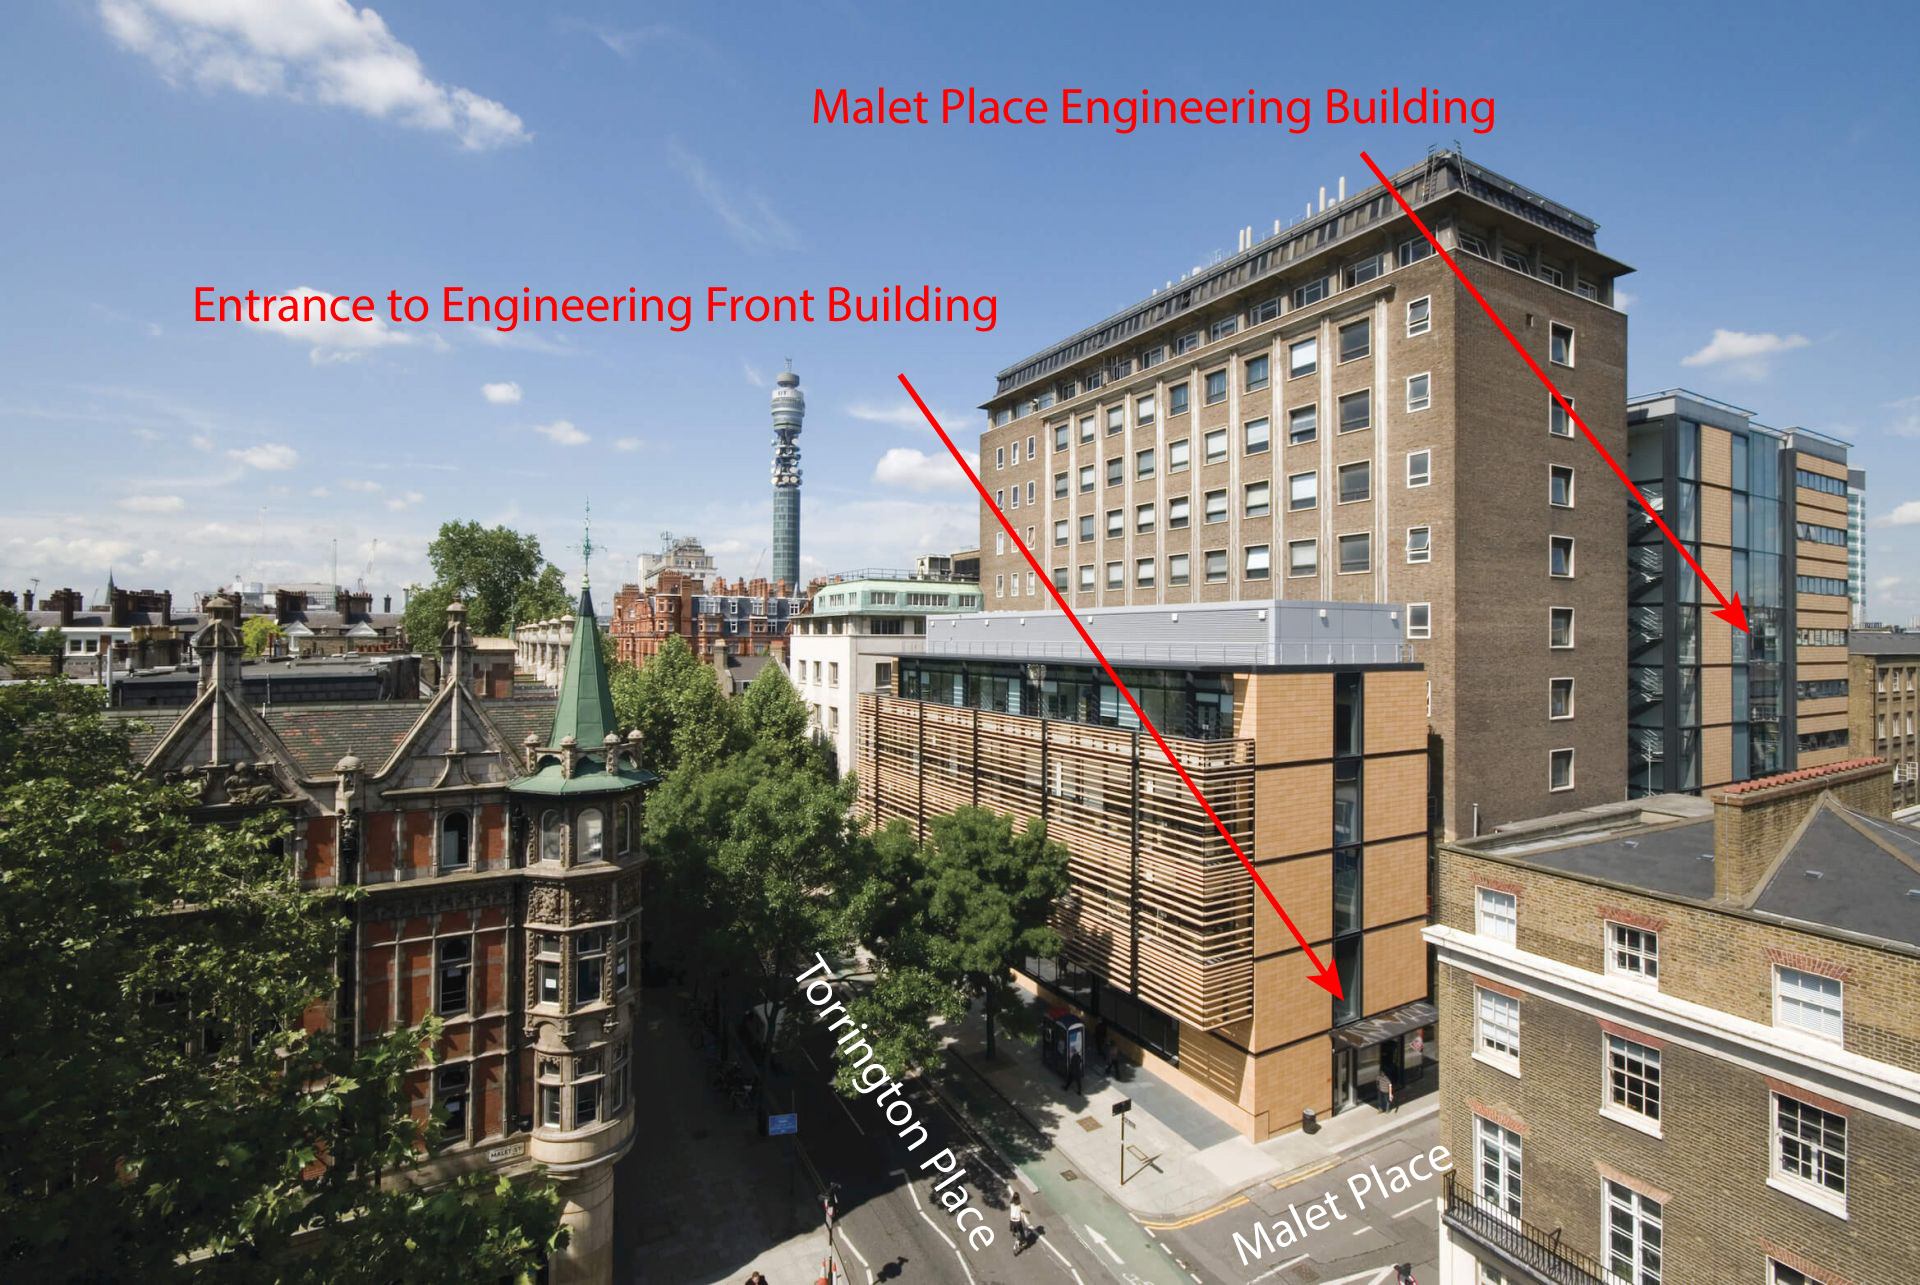 Directions to the Malet Place Engineering Building via the Engineering Front Building.